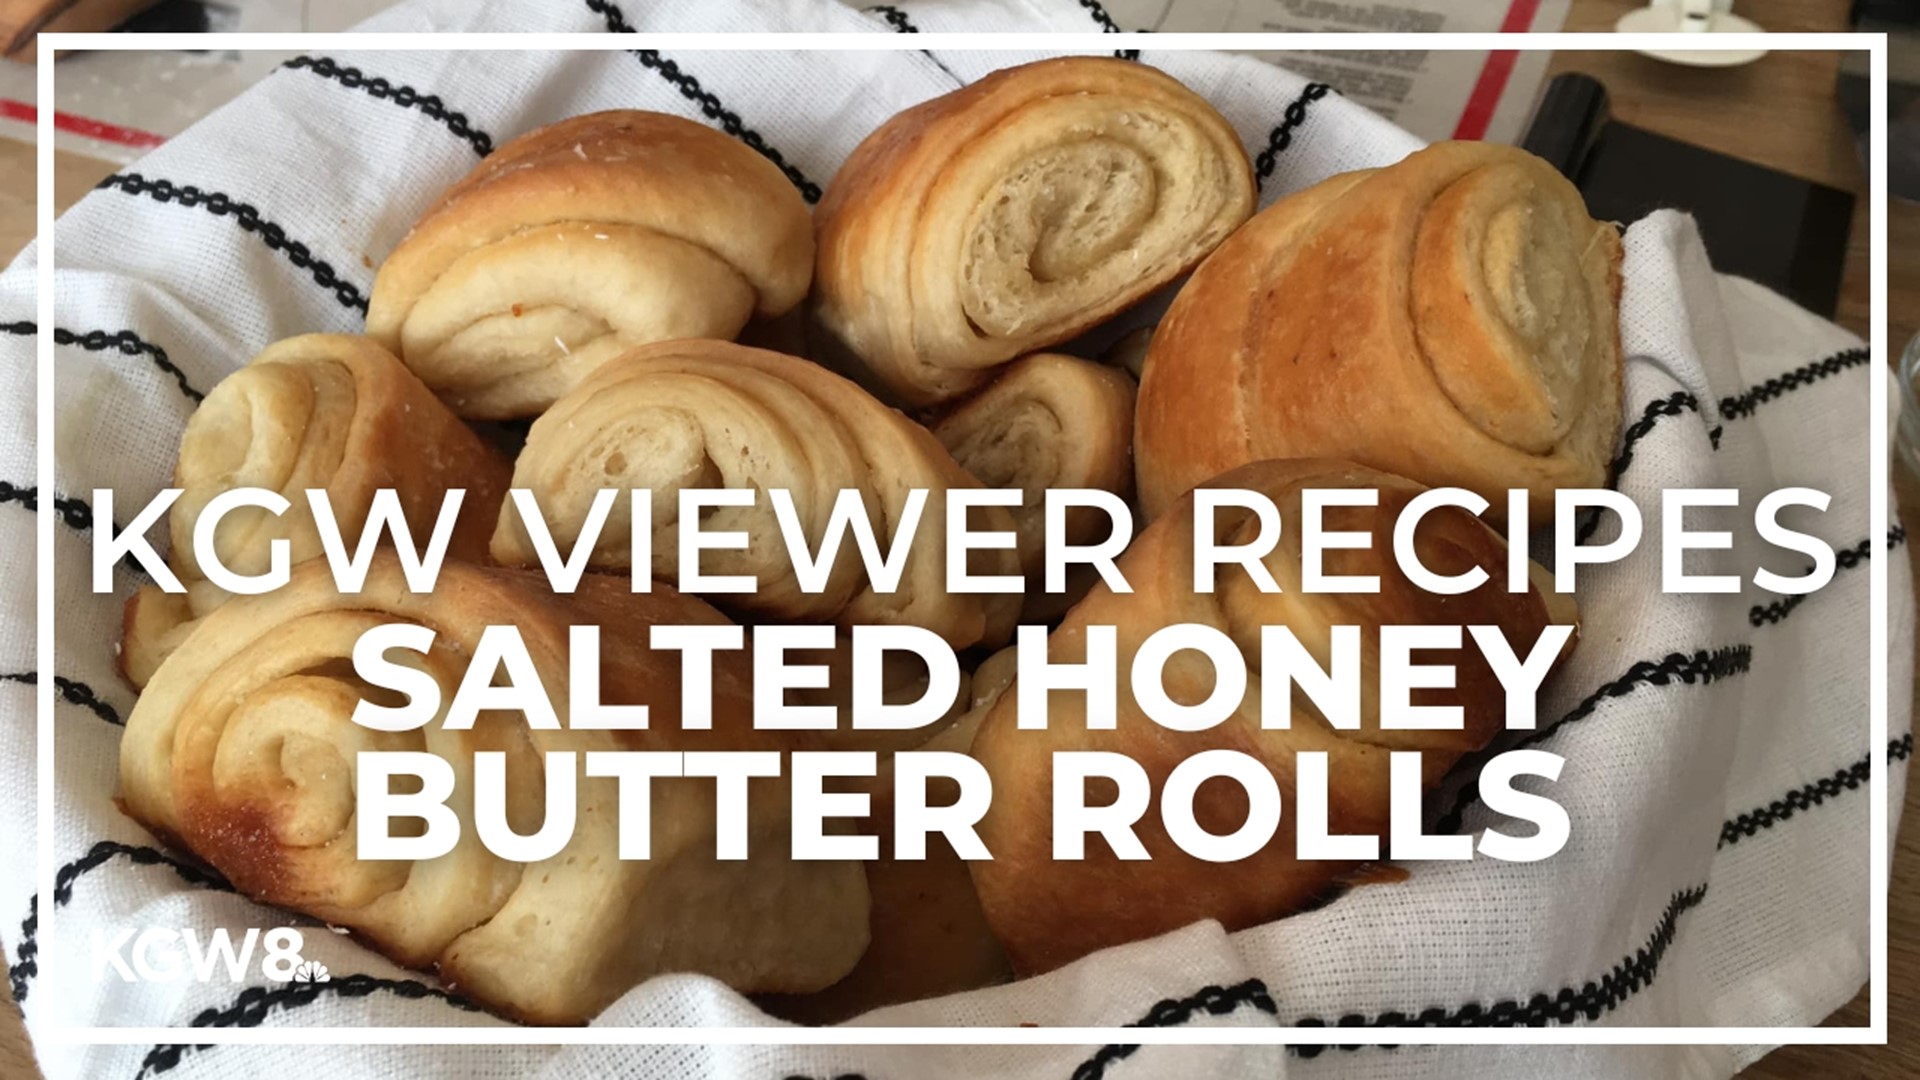 A KGW viewer shared with KGW's Drew Carney her salted honey butter rolls recipe for Thanksgiving. This is Part 3 of a five-part KGW viewer recipe series.